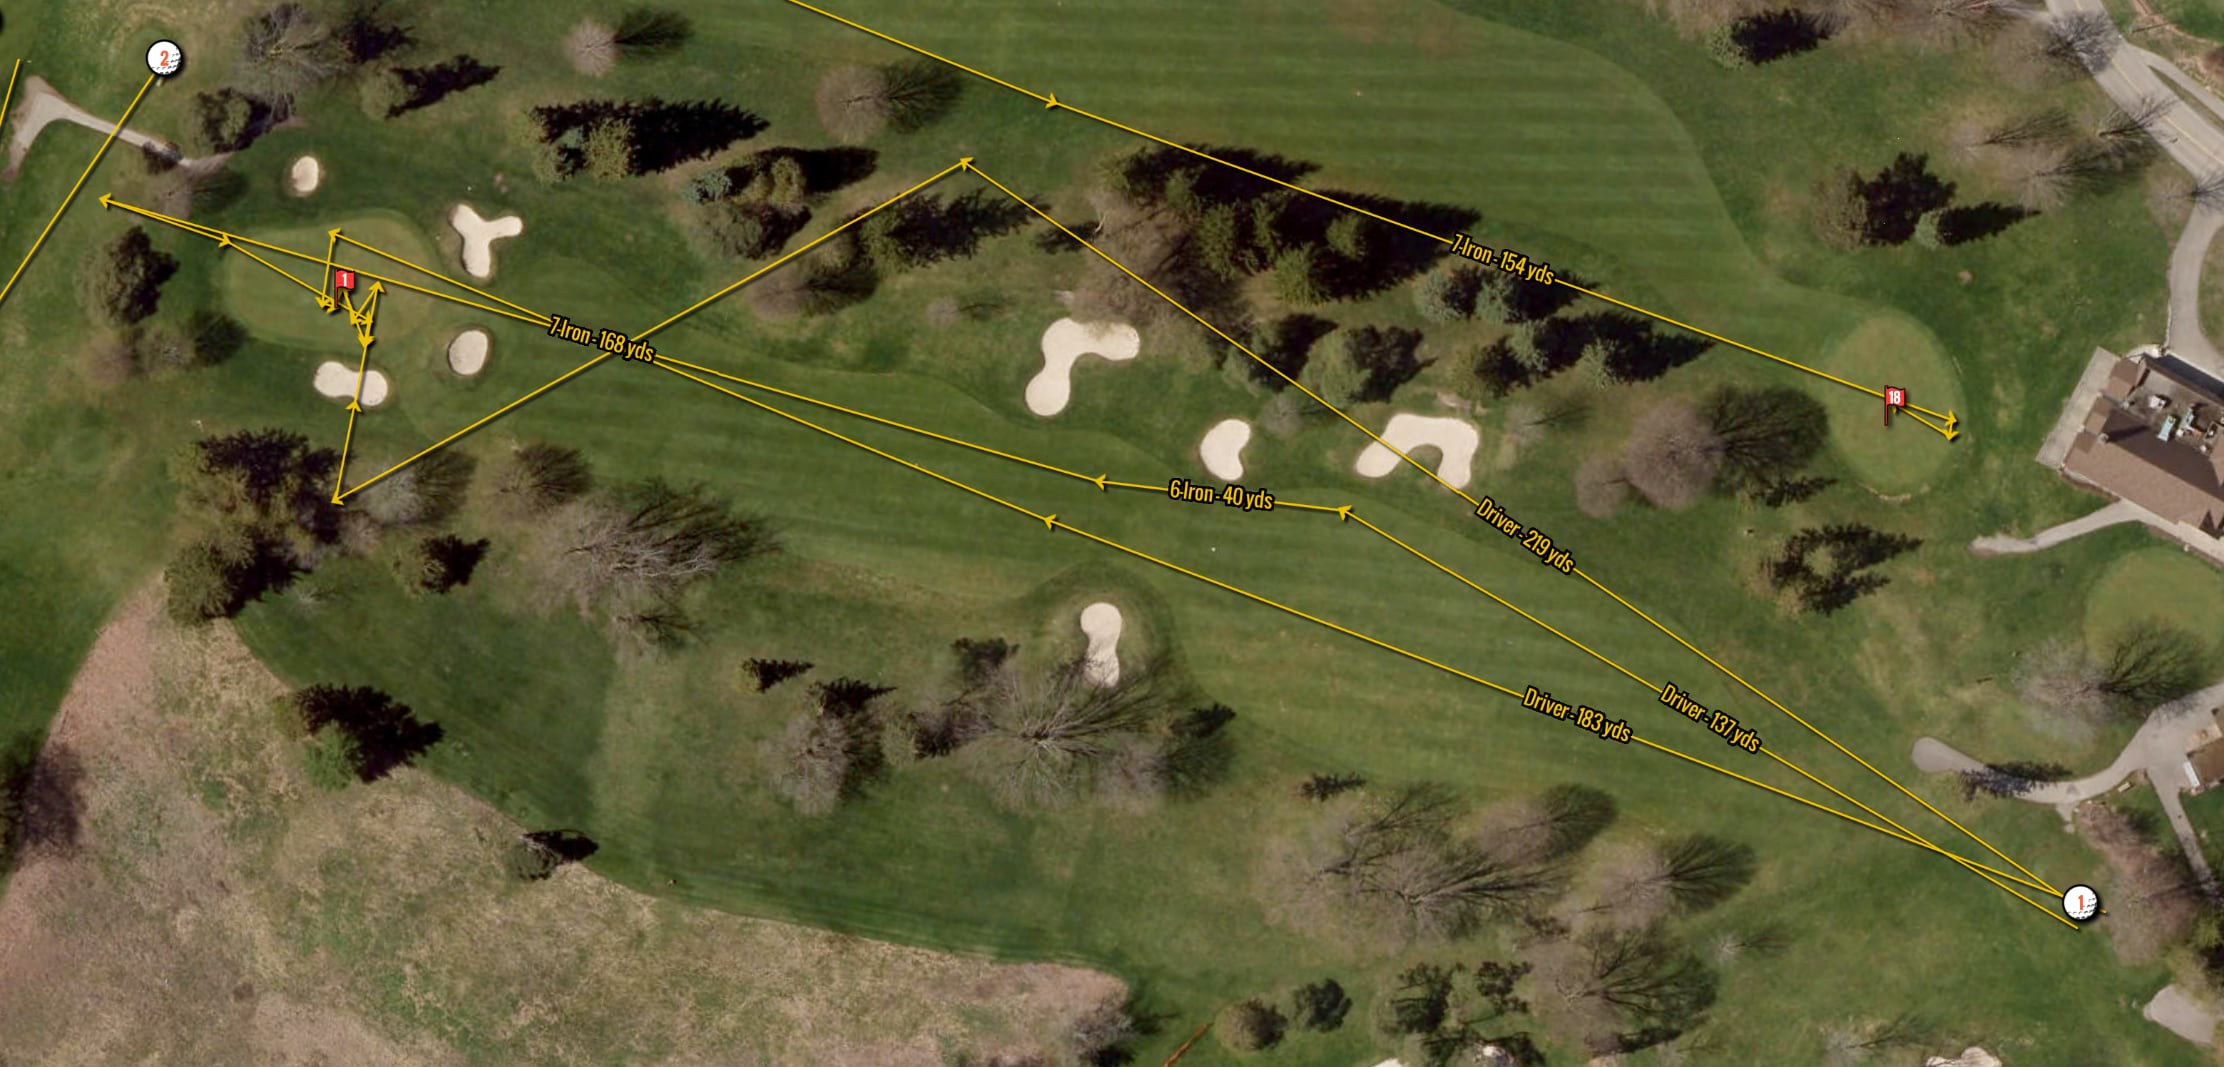 Aerial imagery map of a golf course. Yellow lines, depicting the distance and direction of a golf ball when hit, criss-cross the course.